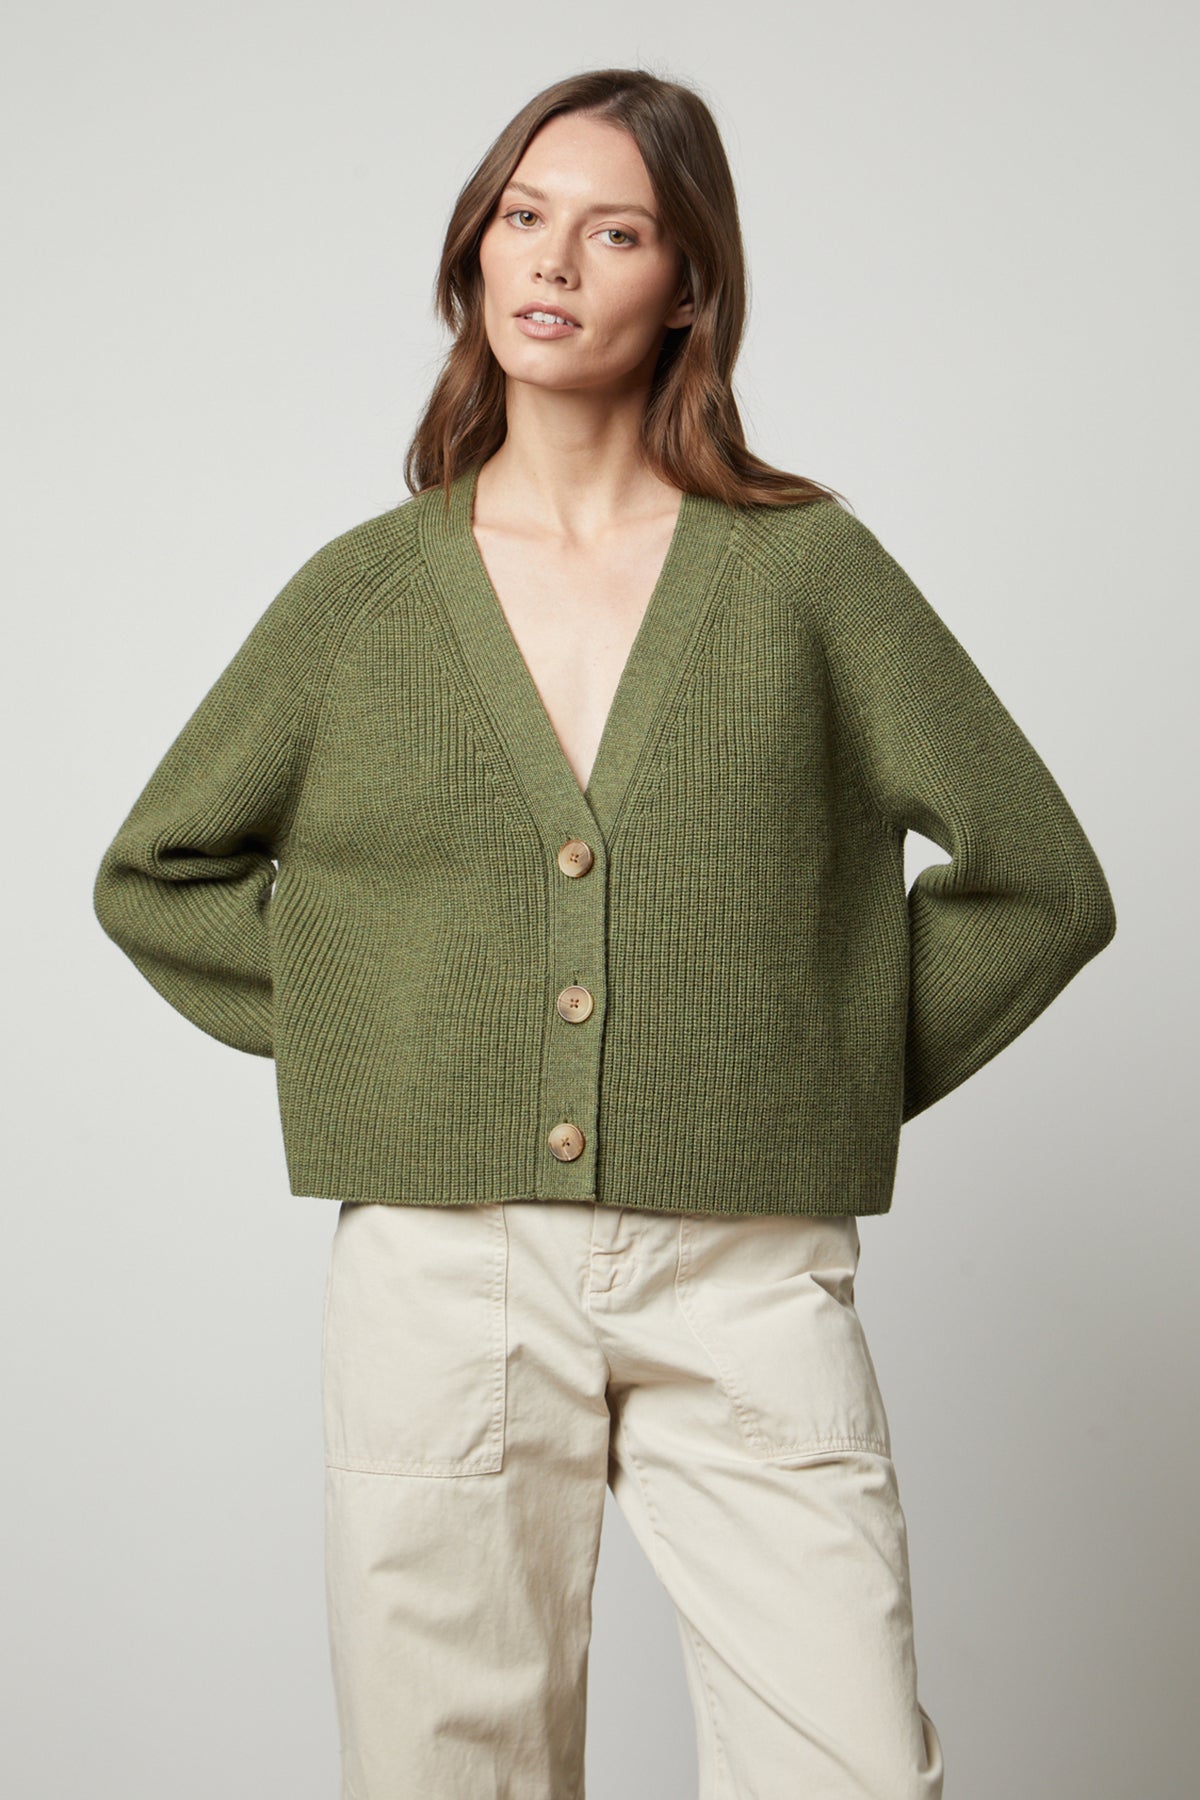   The model is wearing the Marilyn Button Front Cardigan from Velvet by Graham & Spencer, made of wool blend for warmth and comfort, featuring jumbo buttons. 